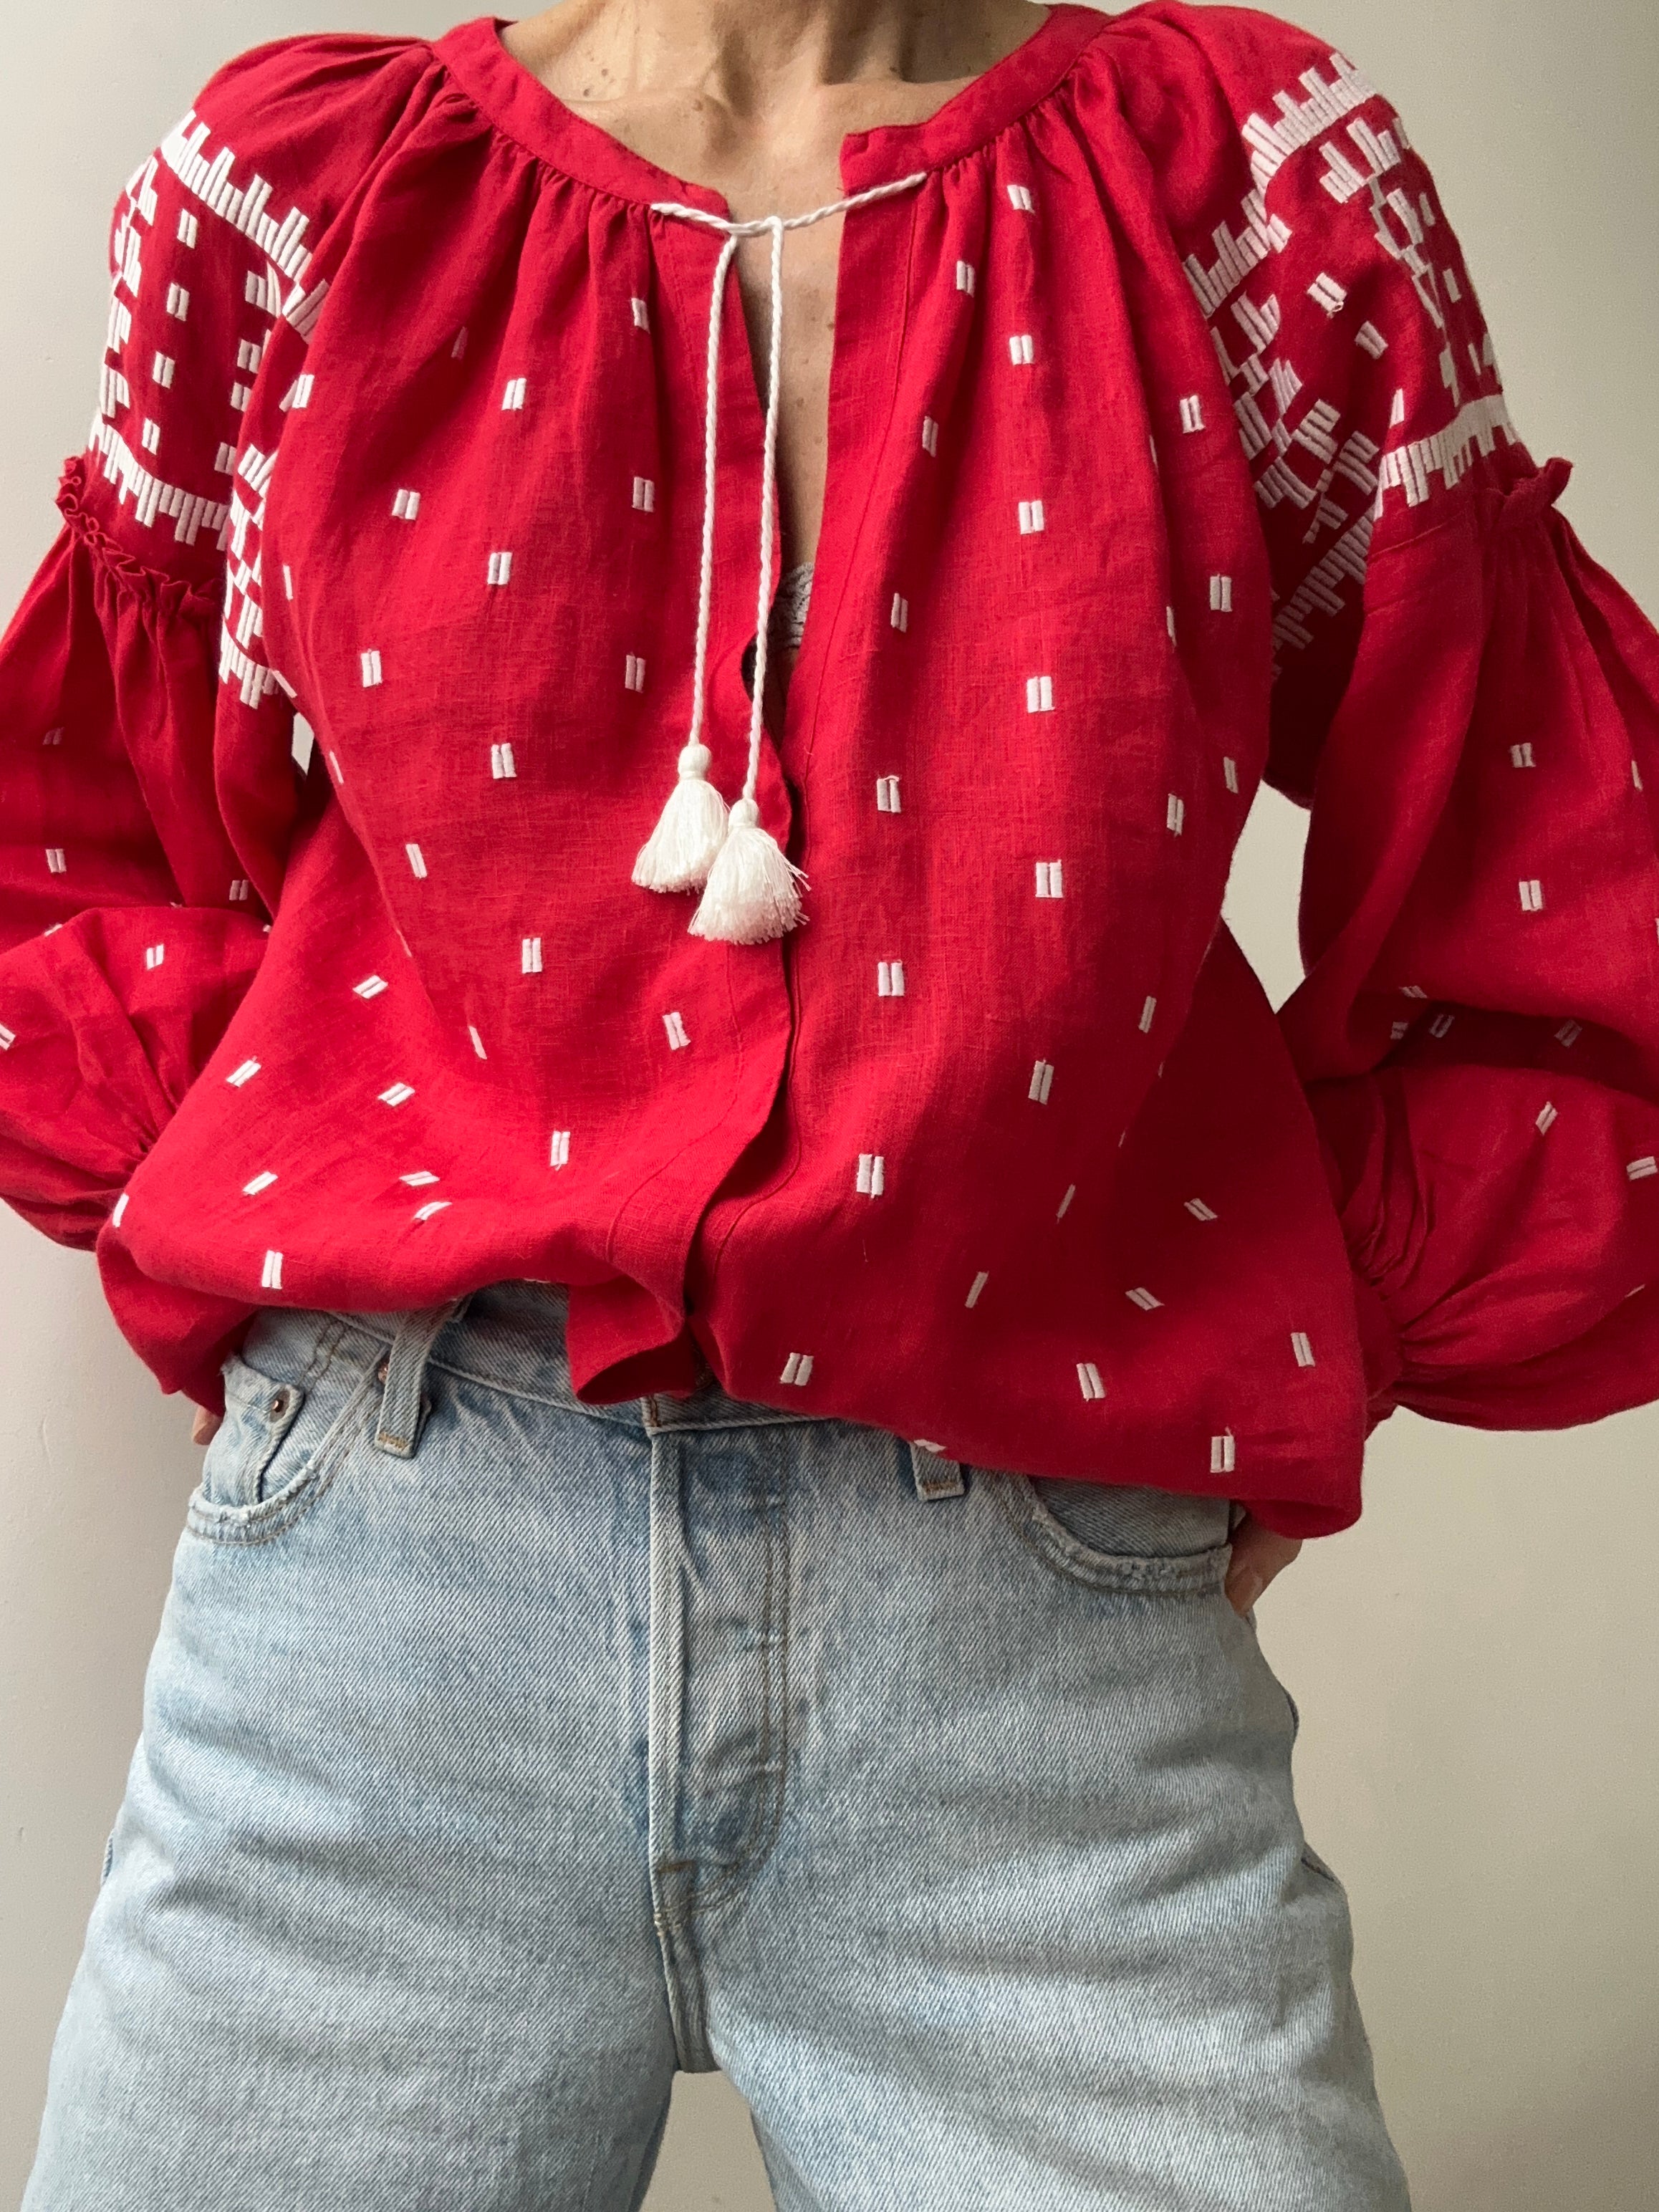 March 11 Blouses March 11 Geometric Blouse Red